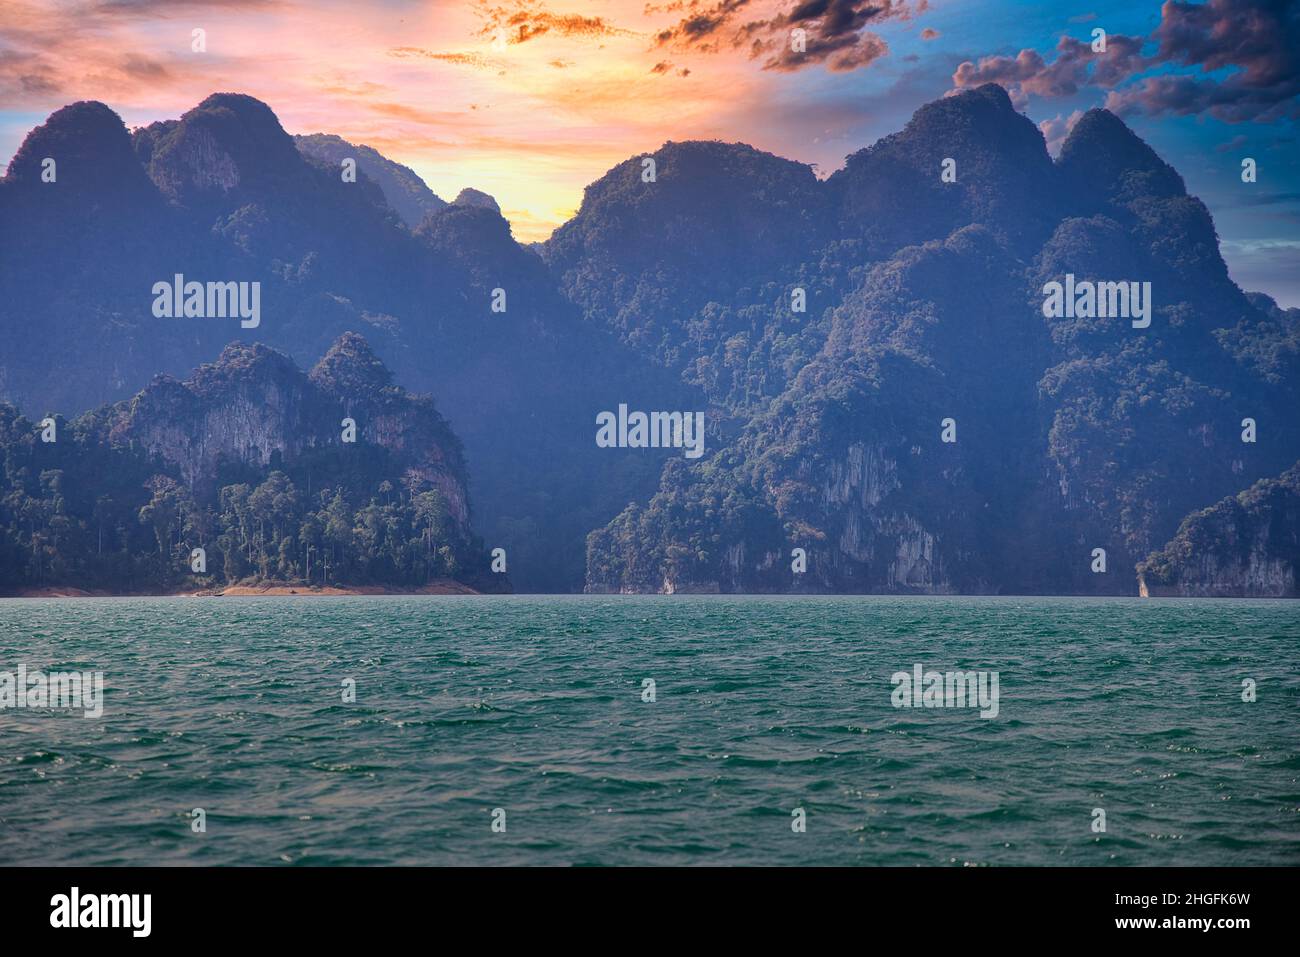 The stunning landscape with water and mountains at sunset of Khao Sok National Park in Thailand Stock Photo